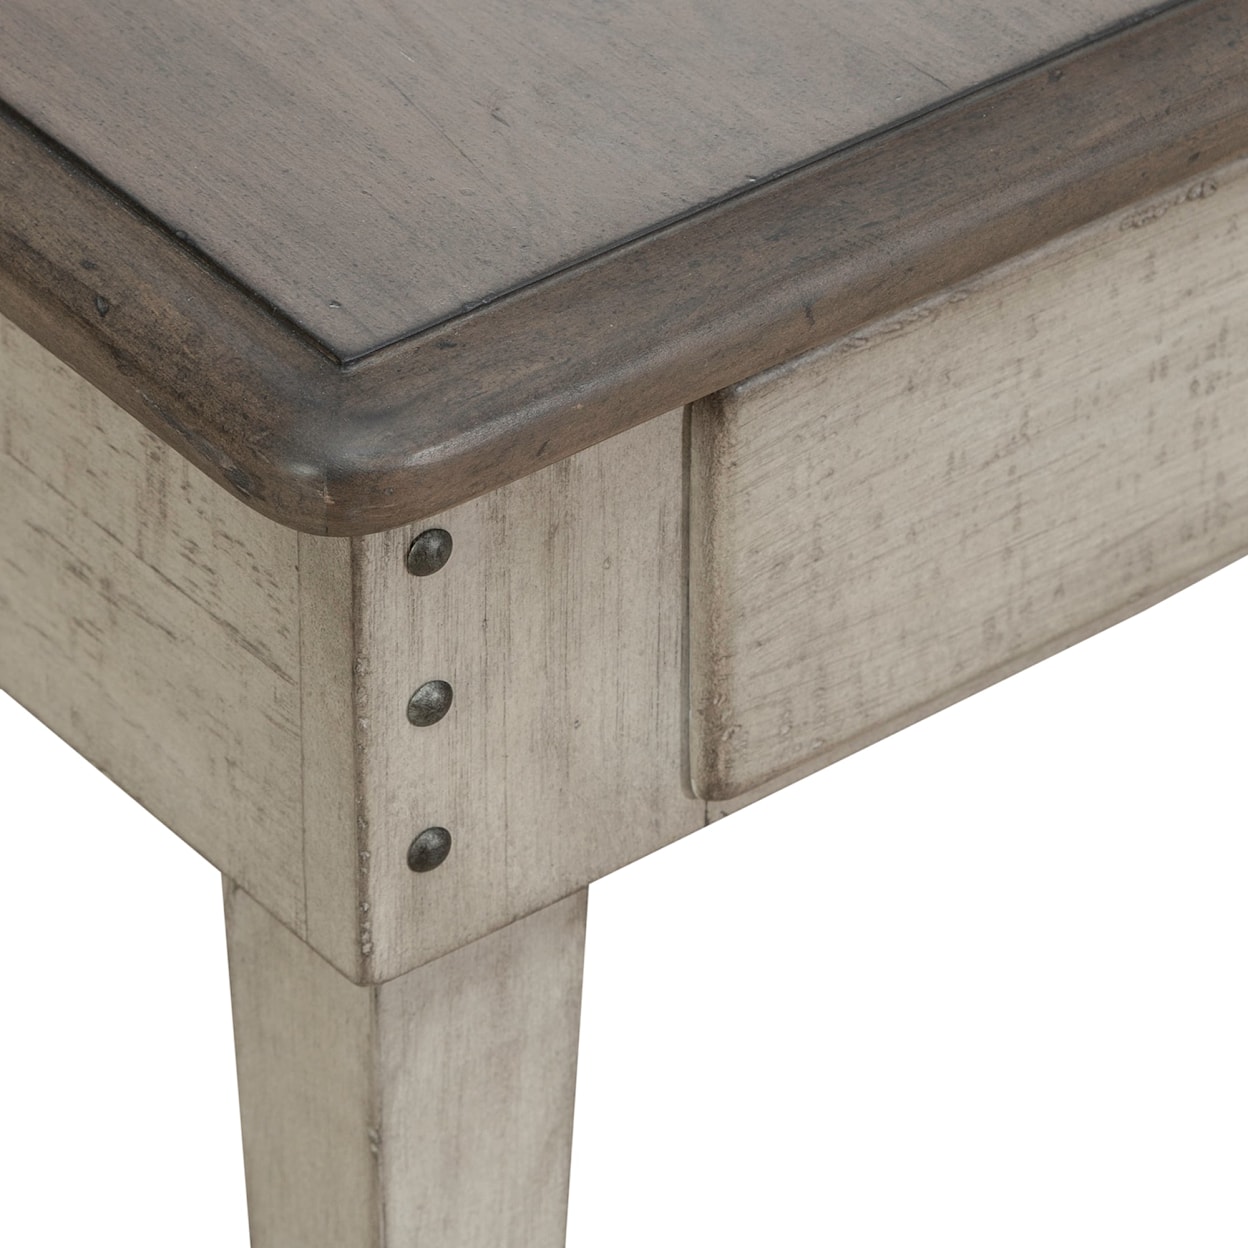 Liberty Furniture Ivy Hollow 1-Drawer End Table